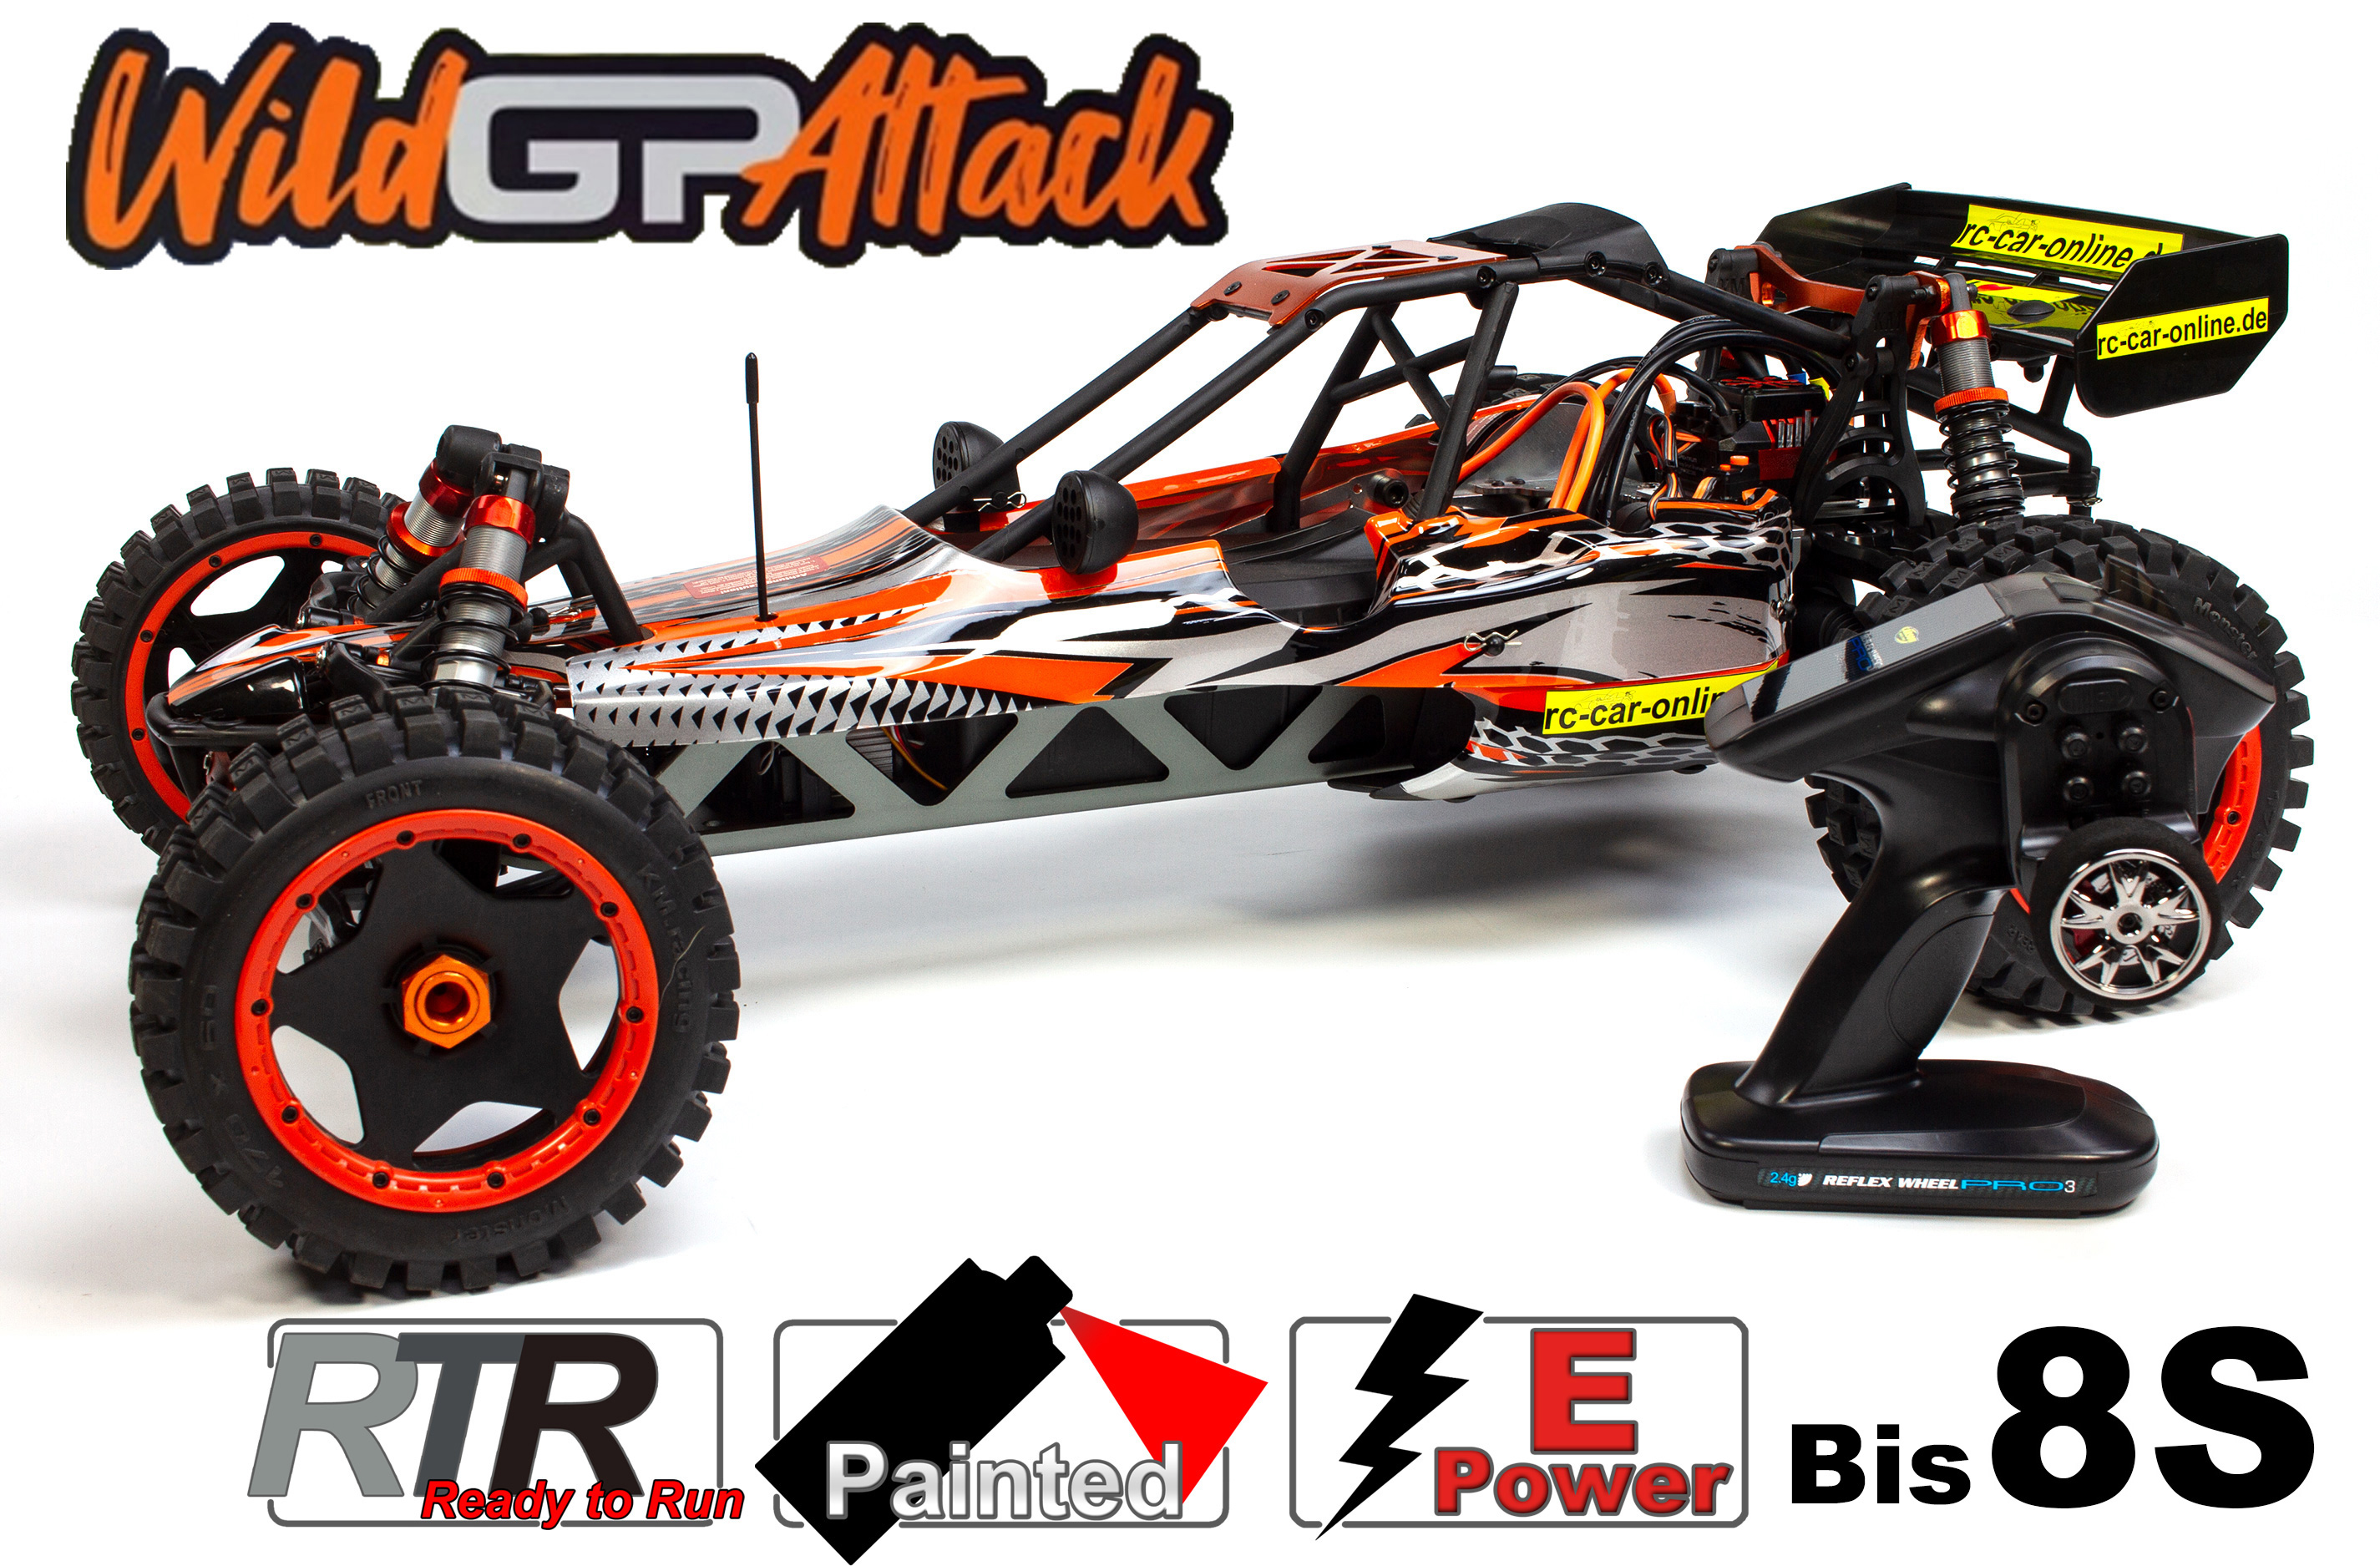 500304032/E Carson 1:5 Wild GP Attack Brushless 2.4GHz RTR, 200A / 700kV / bis 8S